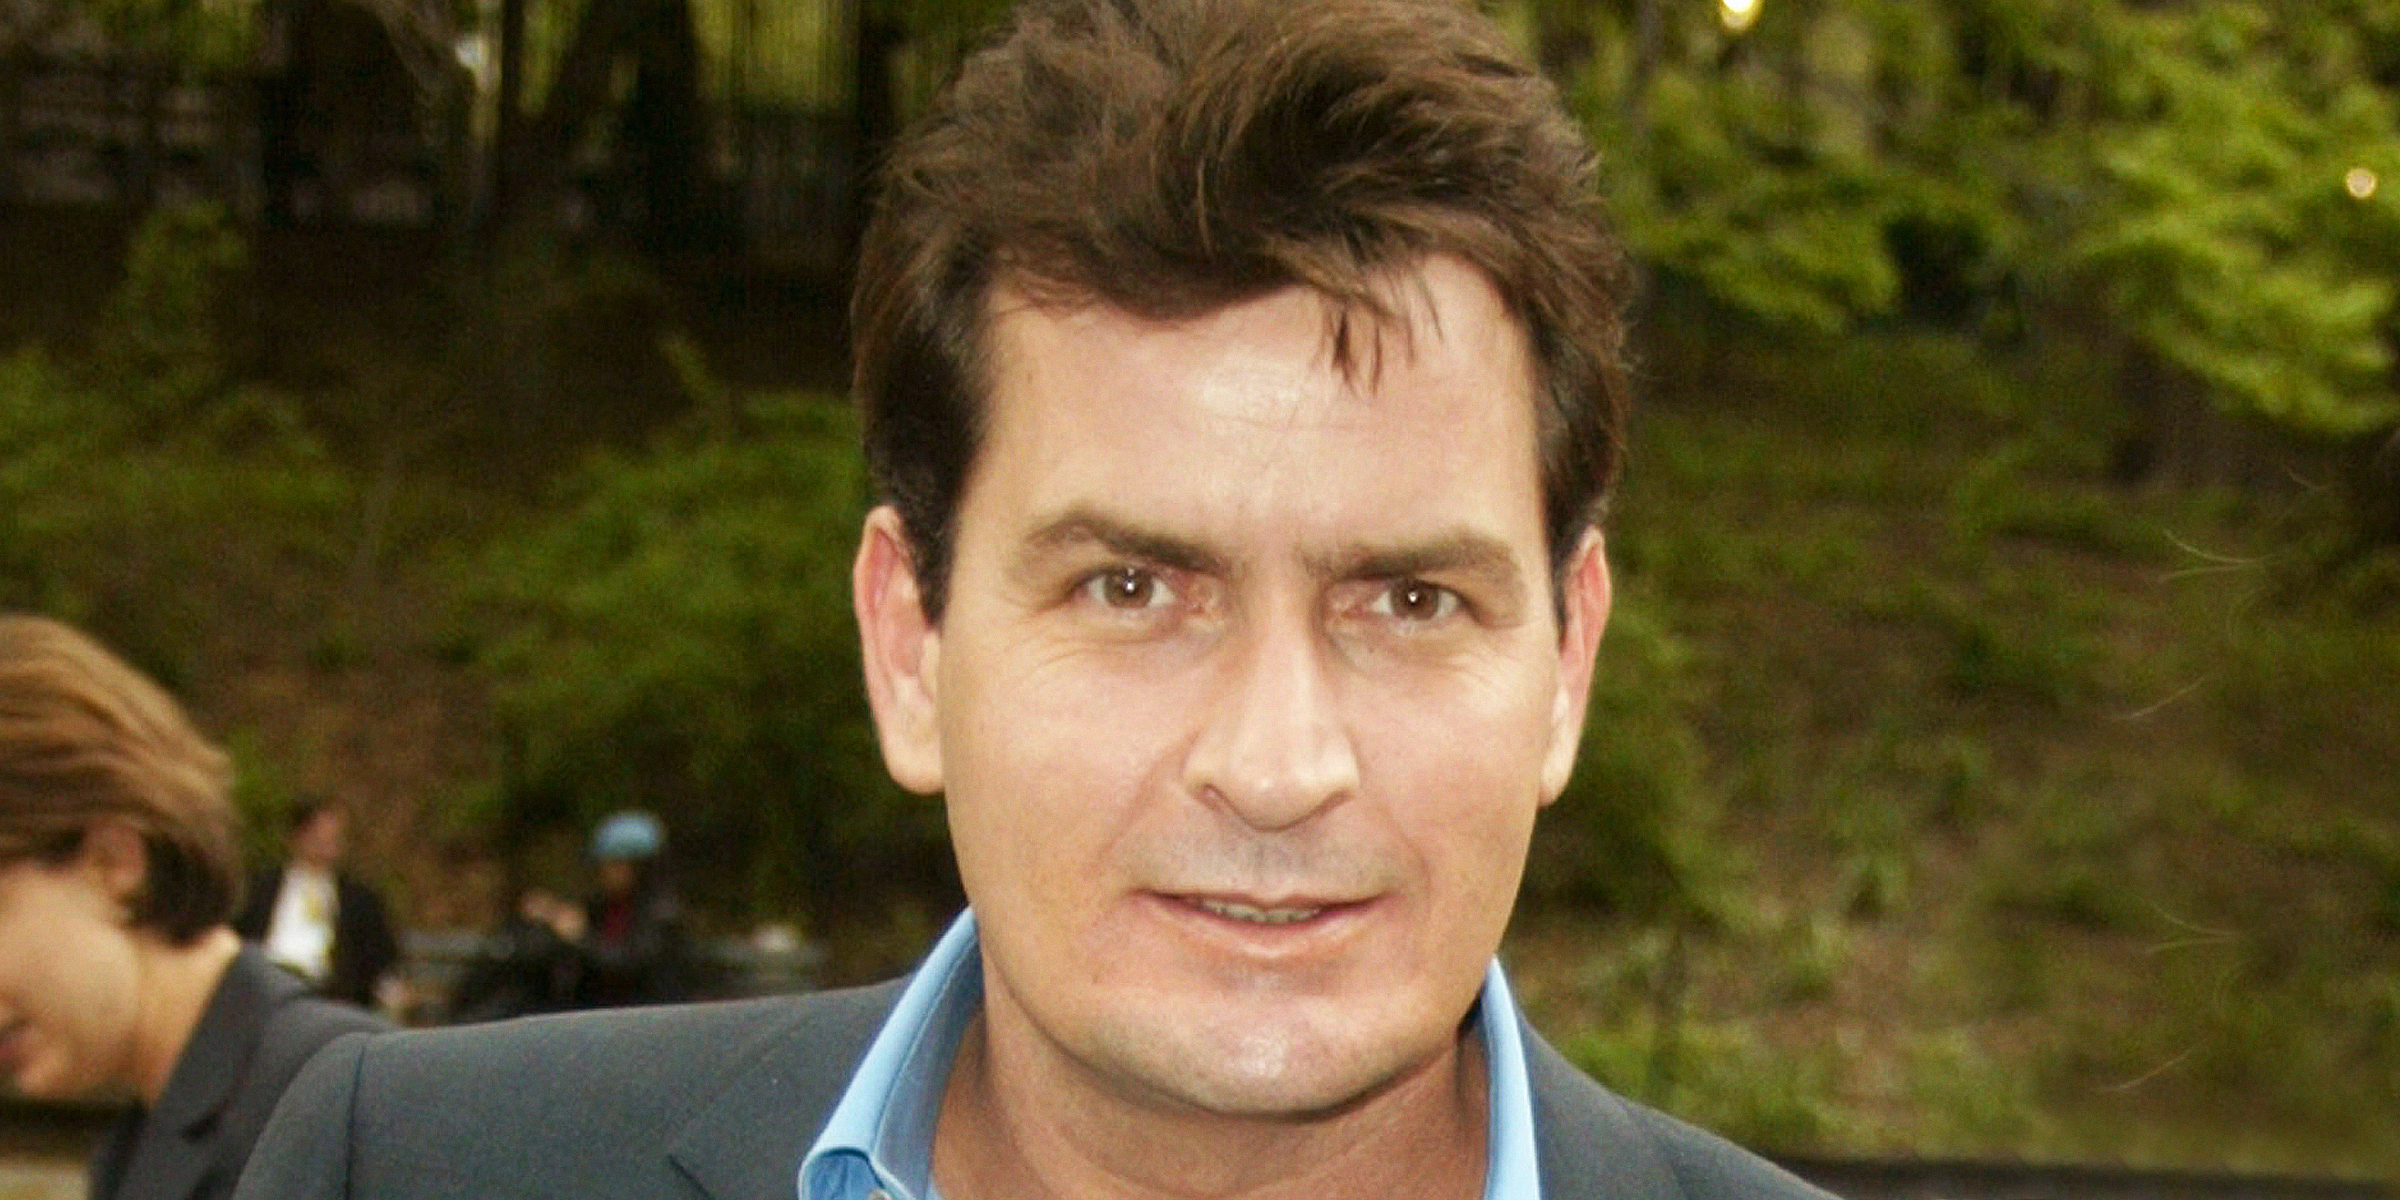 Charlie Sheen | Source: Getty Images